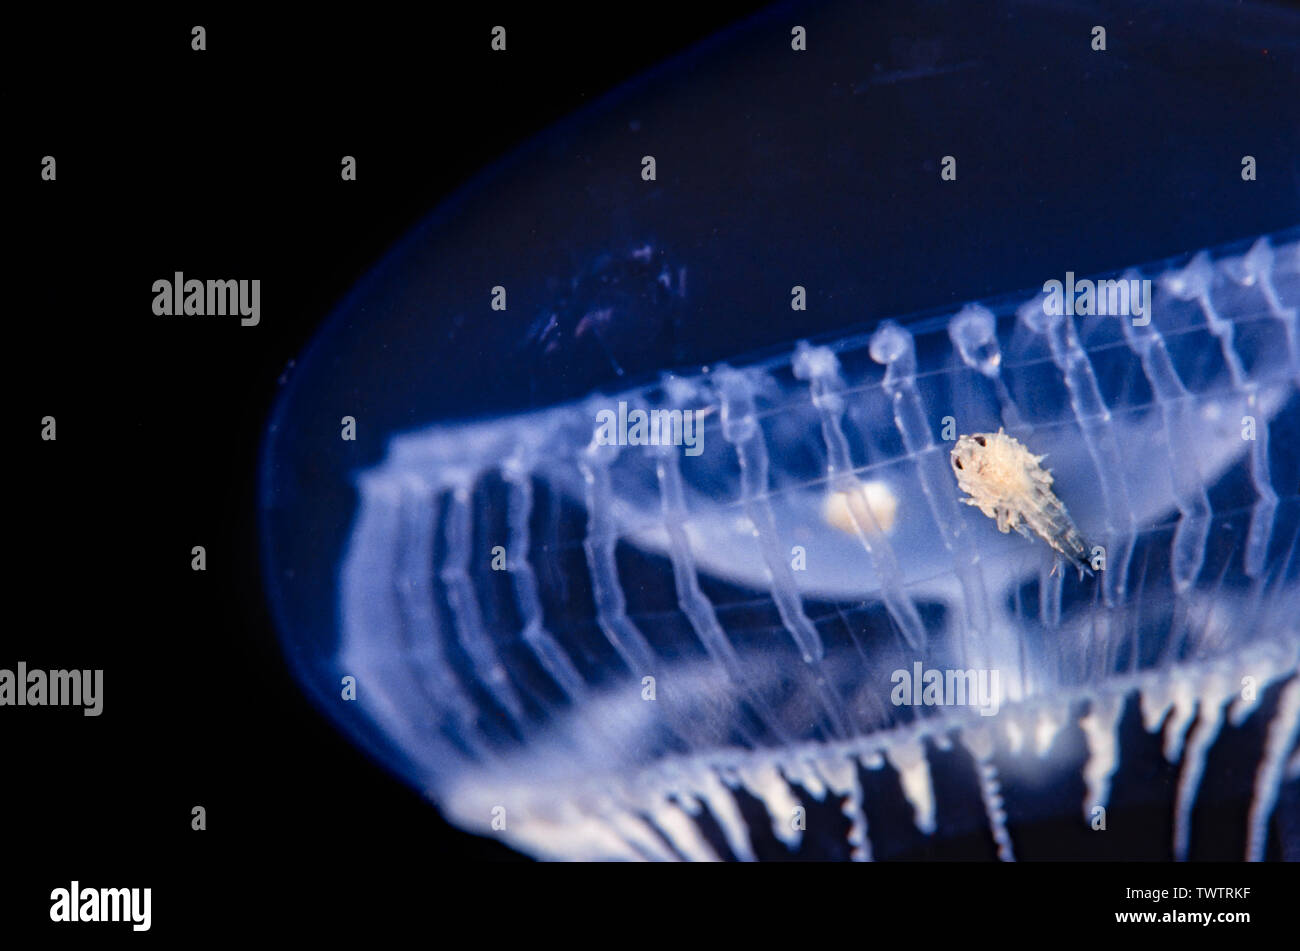 A tiny larval crustacean clings onto the bell of a jellyfish, British Columbia, Canada. The jellyfish is one inch across and photographed at night. Stock Photo